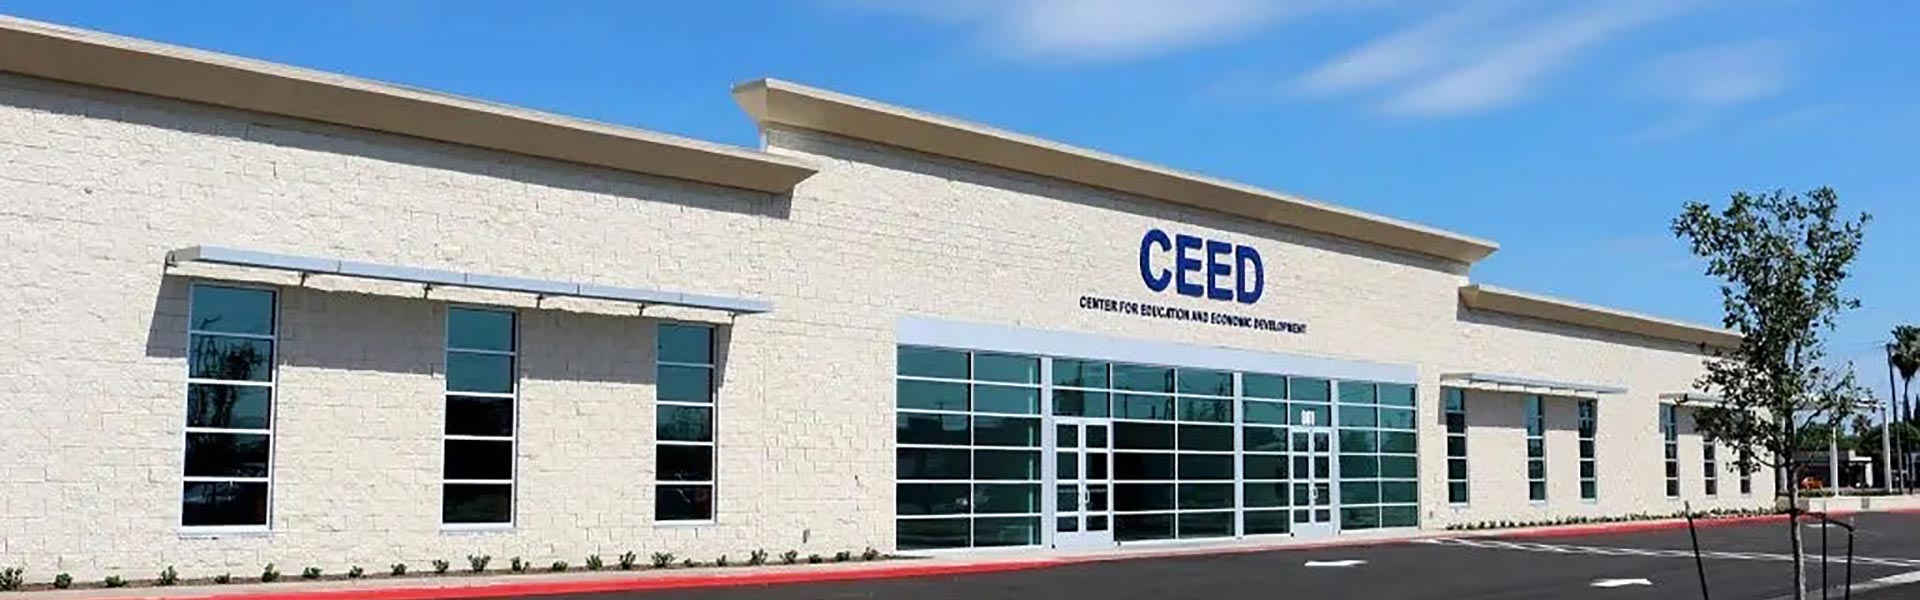 CEED building in Mission, Texas